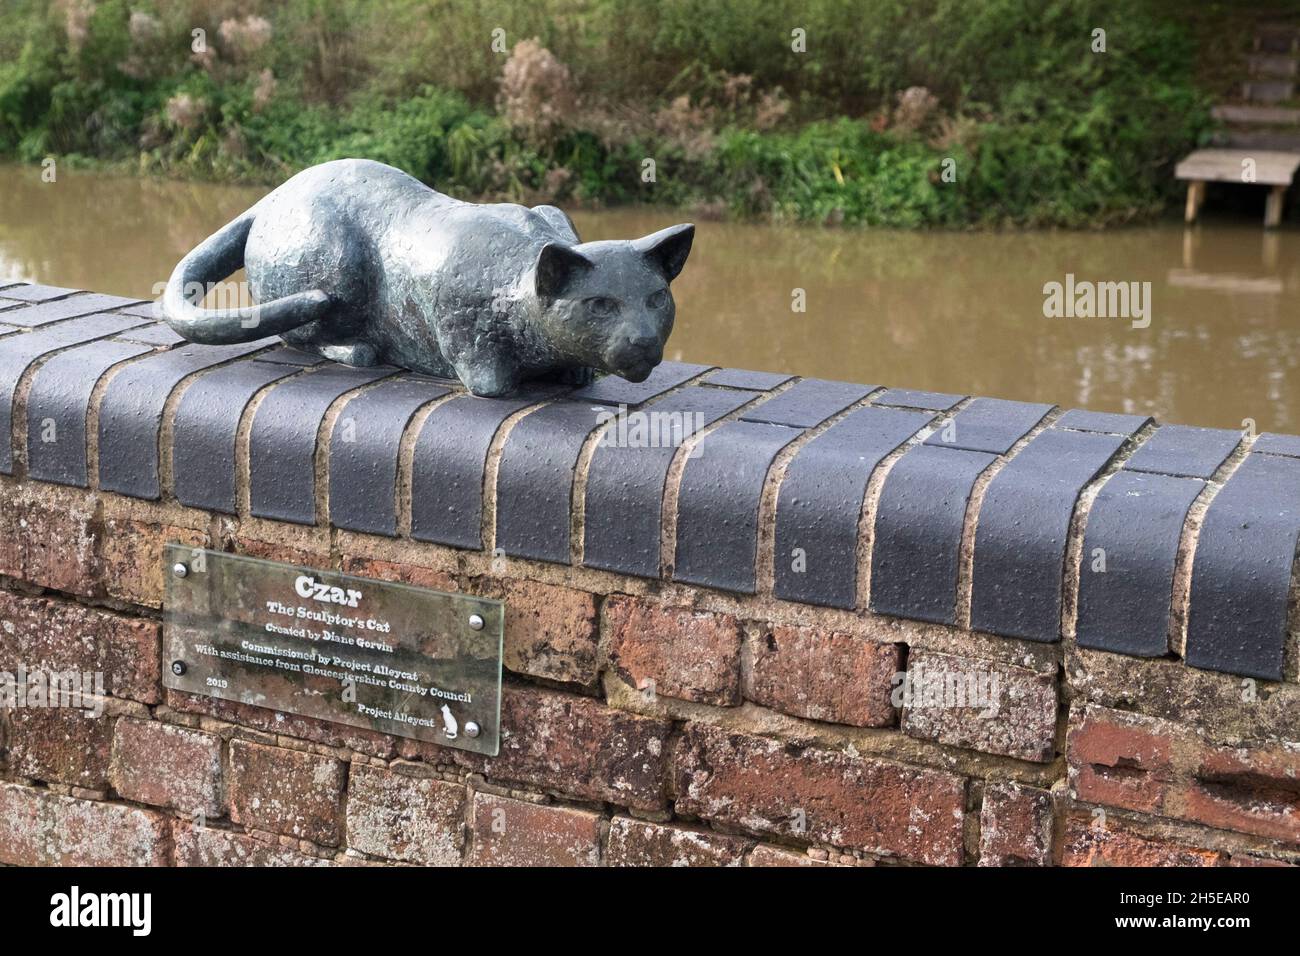 Tewkesbury is a small townon the River Severn in Gloucestershire UK. Czar the Sculptors cat Stock Photo